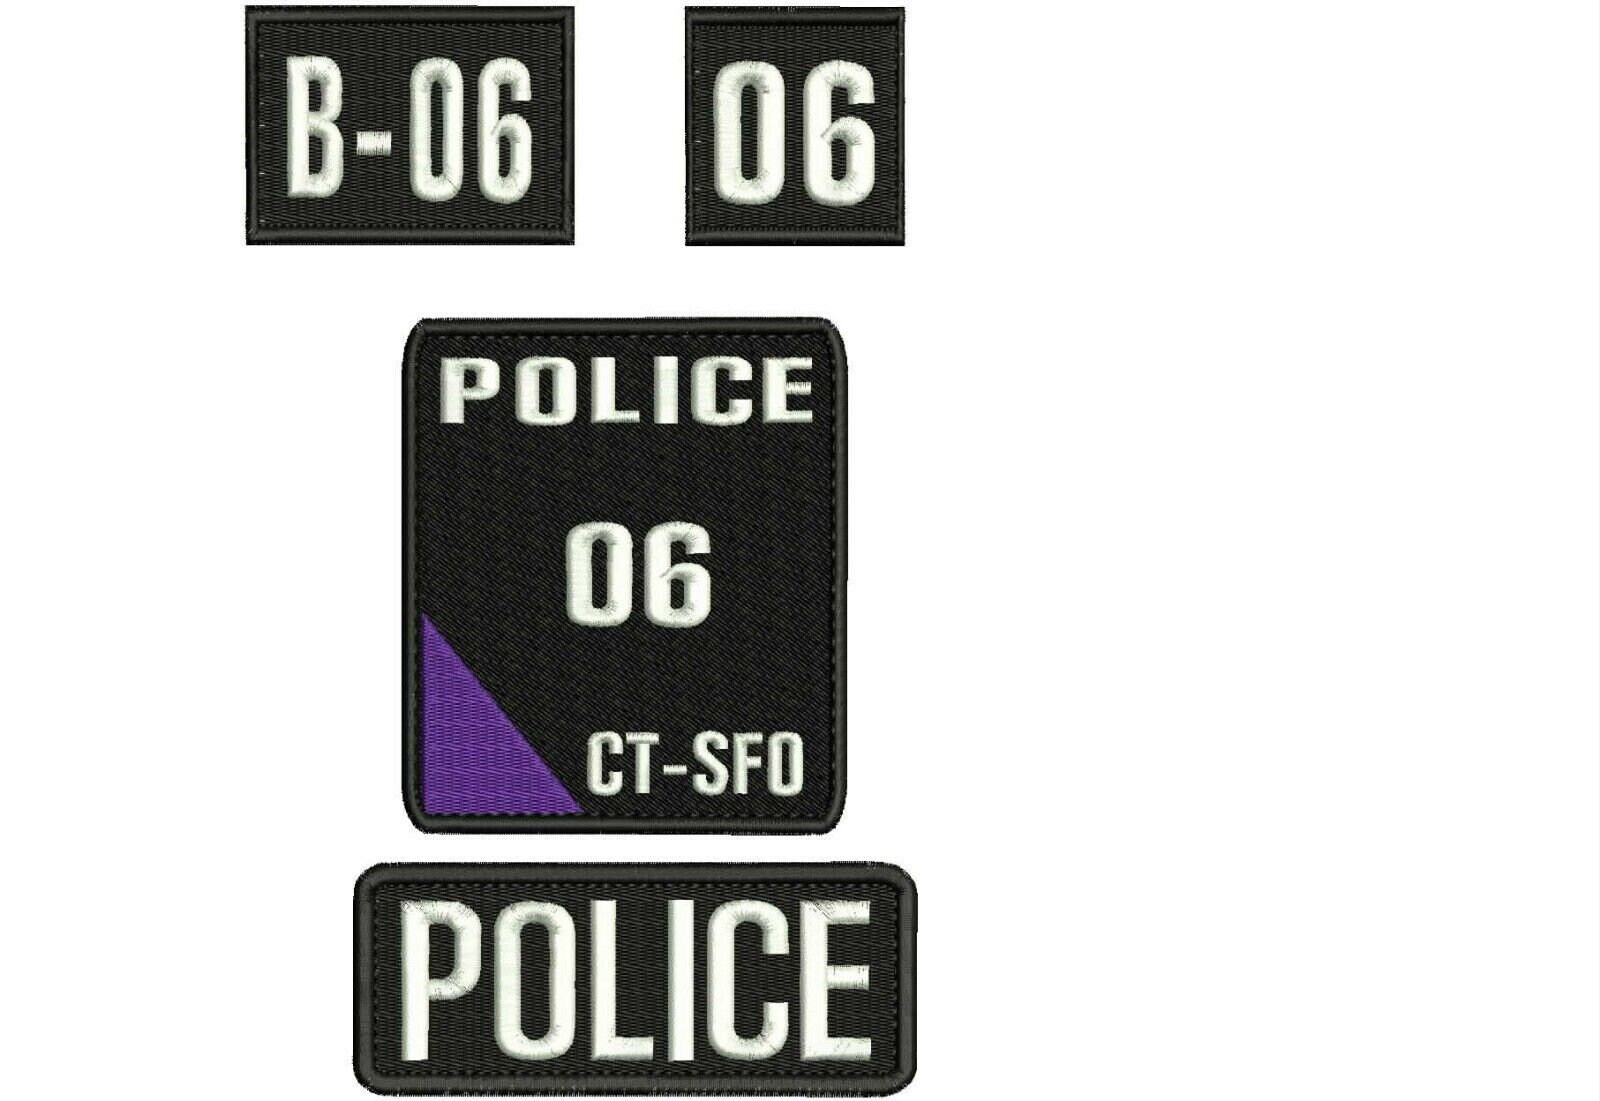 Police 10 CTSFO embroidery patches 4x4.5 with call signs Hook